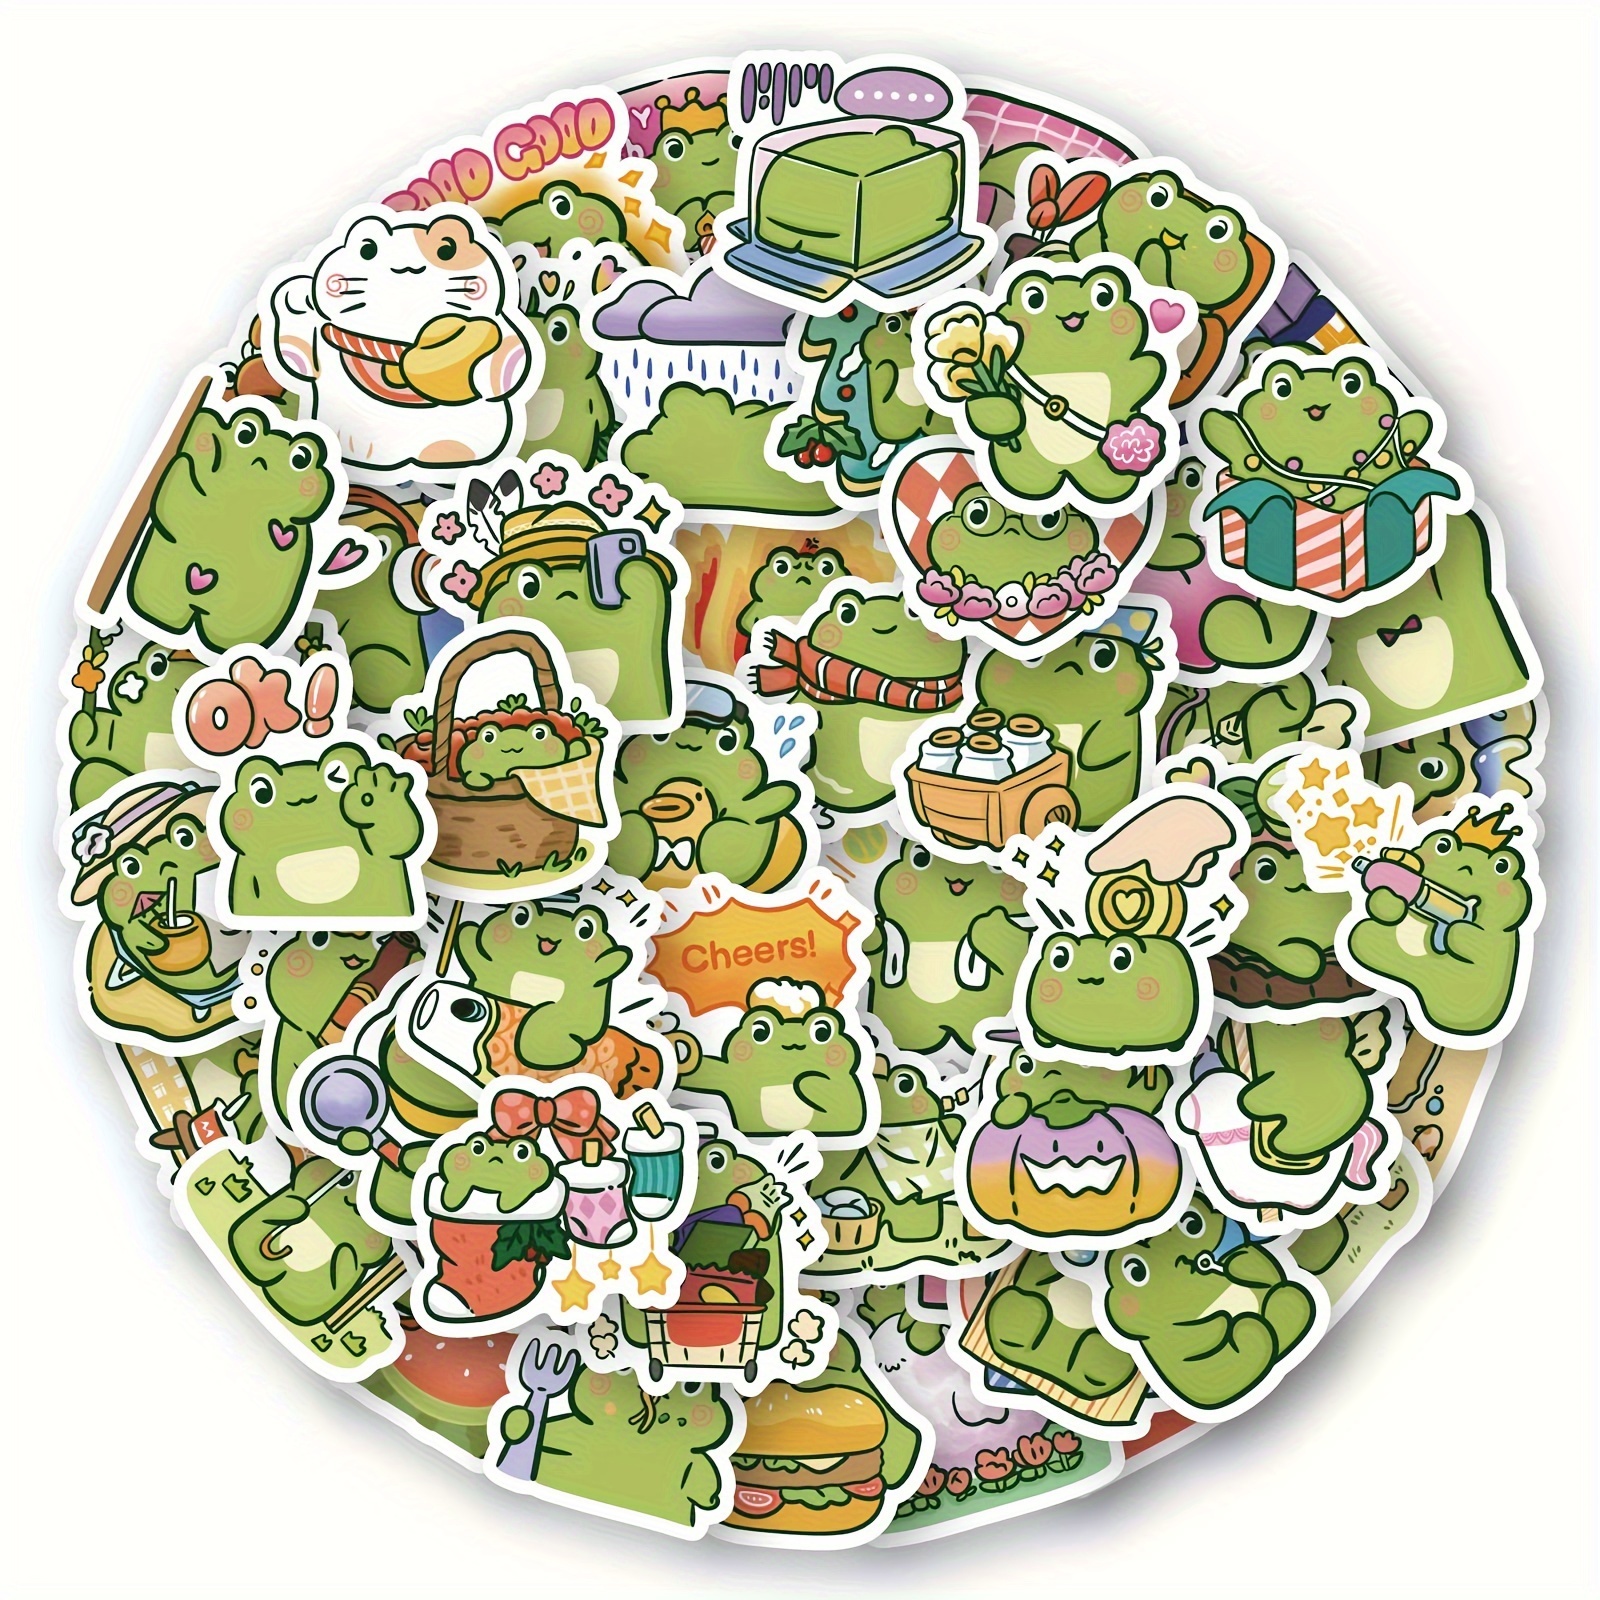 500pcs Frog Stickers Roll Cute Aesthetic Vinyl Stickers For Laptop, Guitar,  Skateboard, Luggage, Gift For Frog Lovers Teen Birthday Party